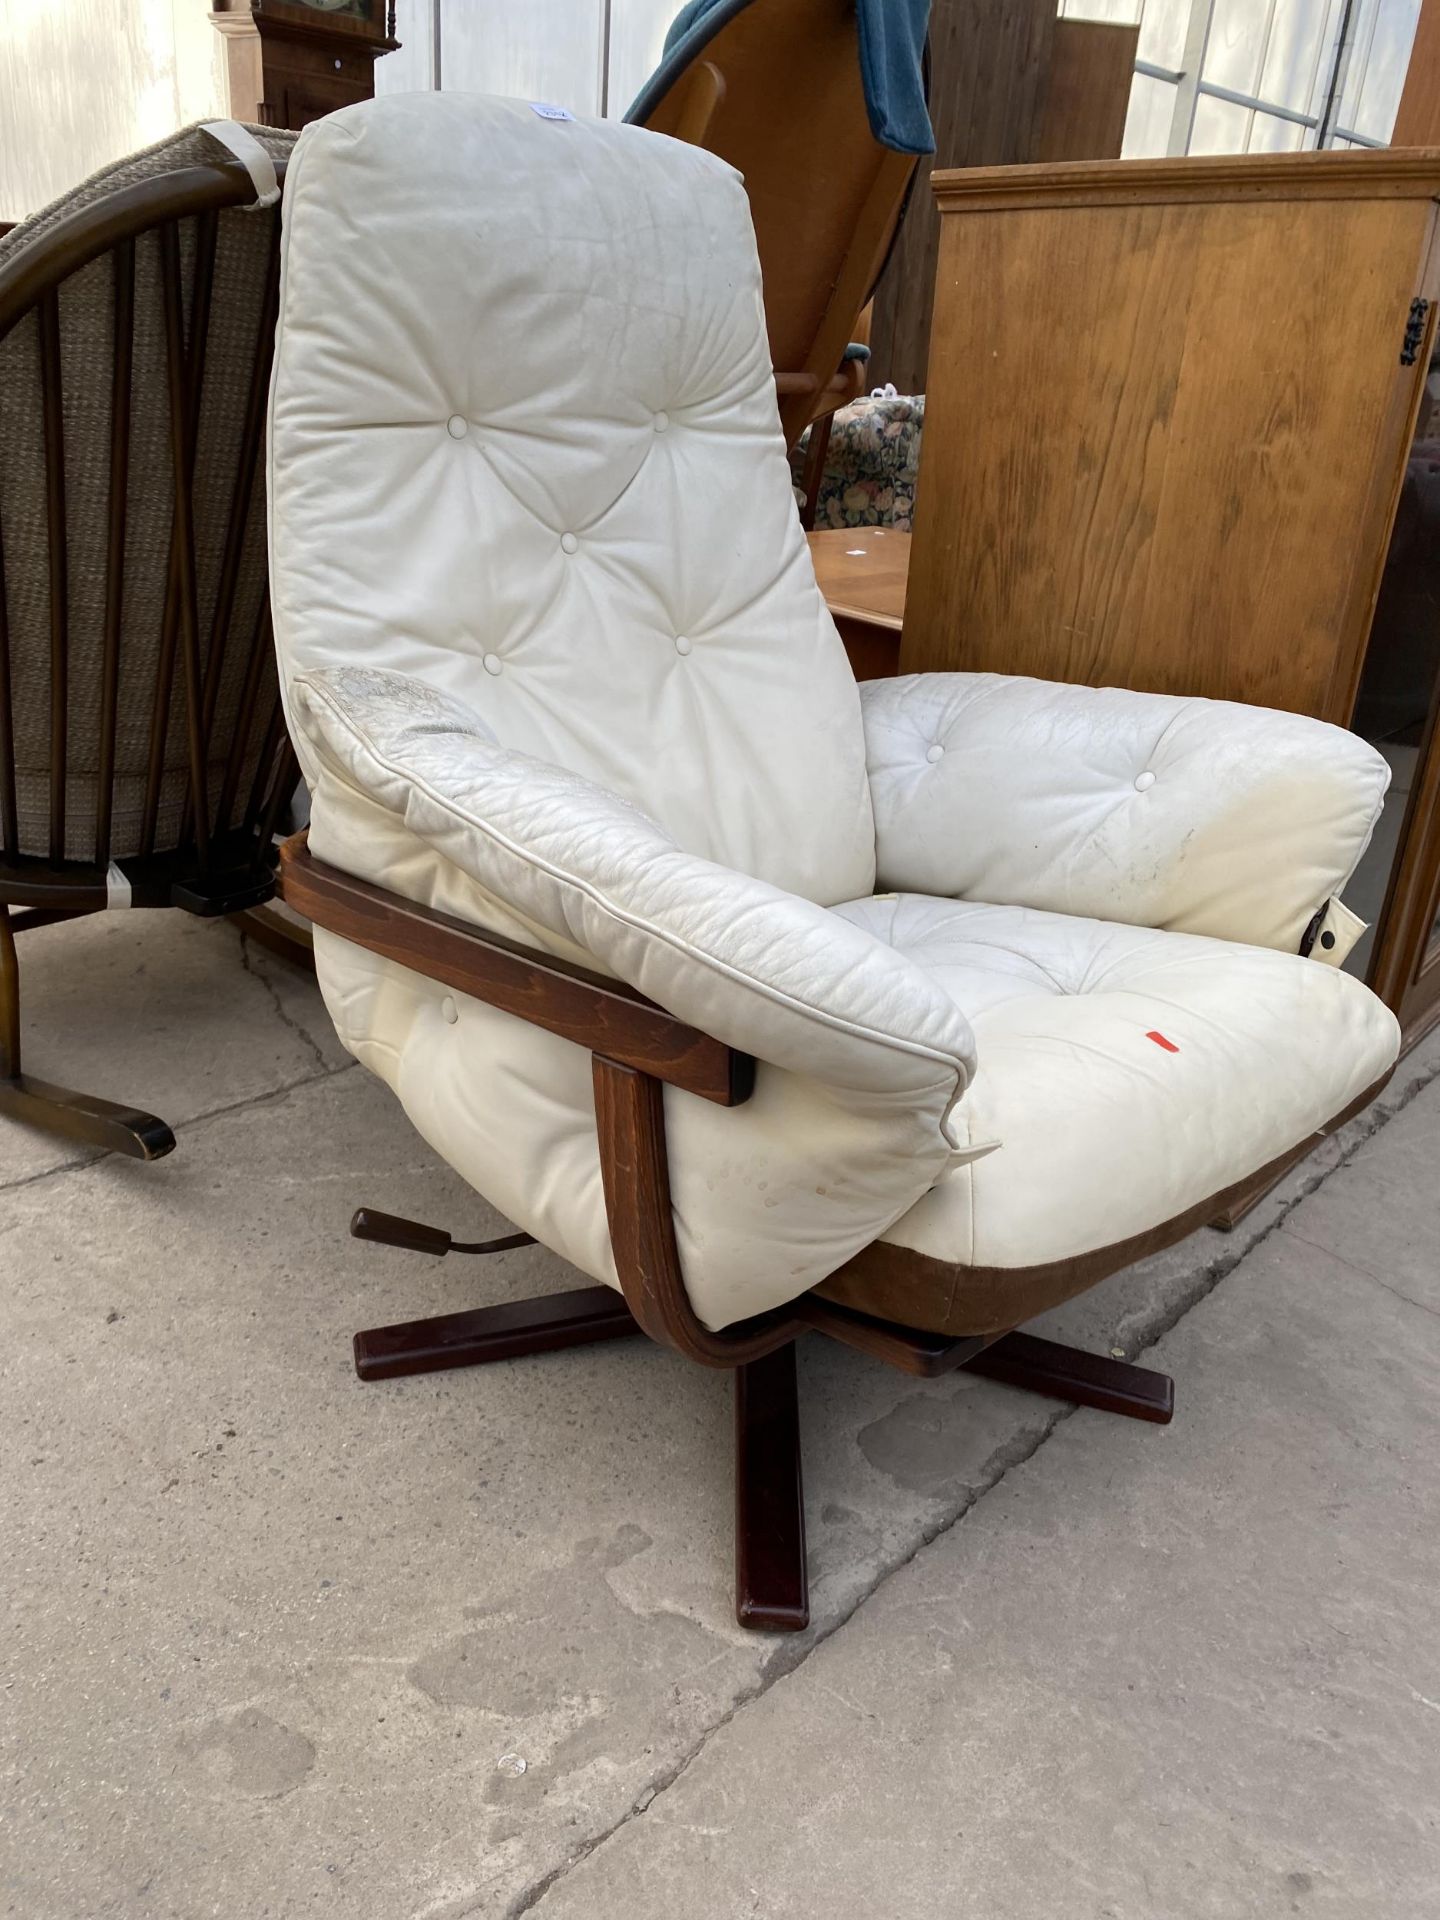 A 'MOEBEL' SWIVEL RECLINER CHAIR ON BENTWOOD FRAME - Image 2 of 3